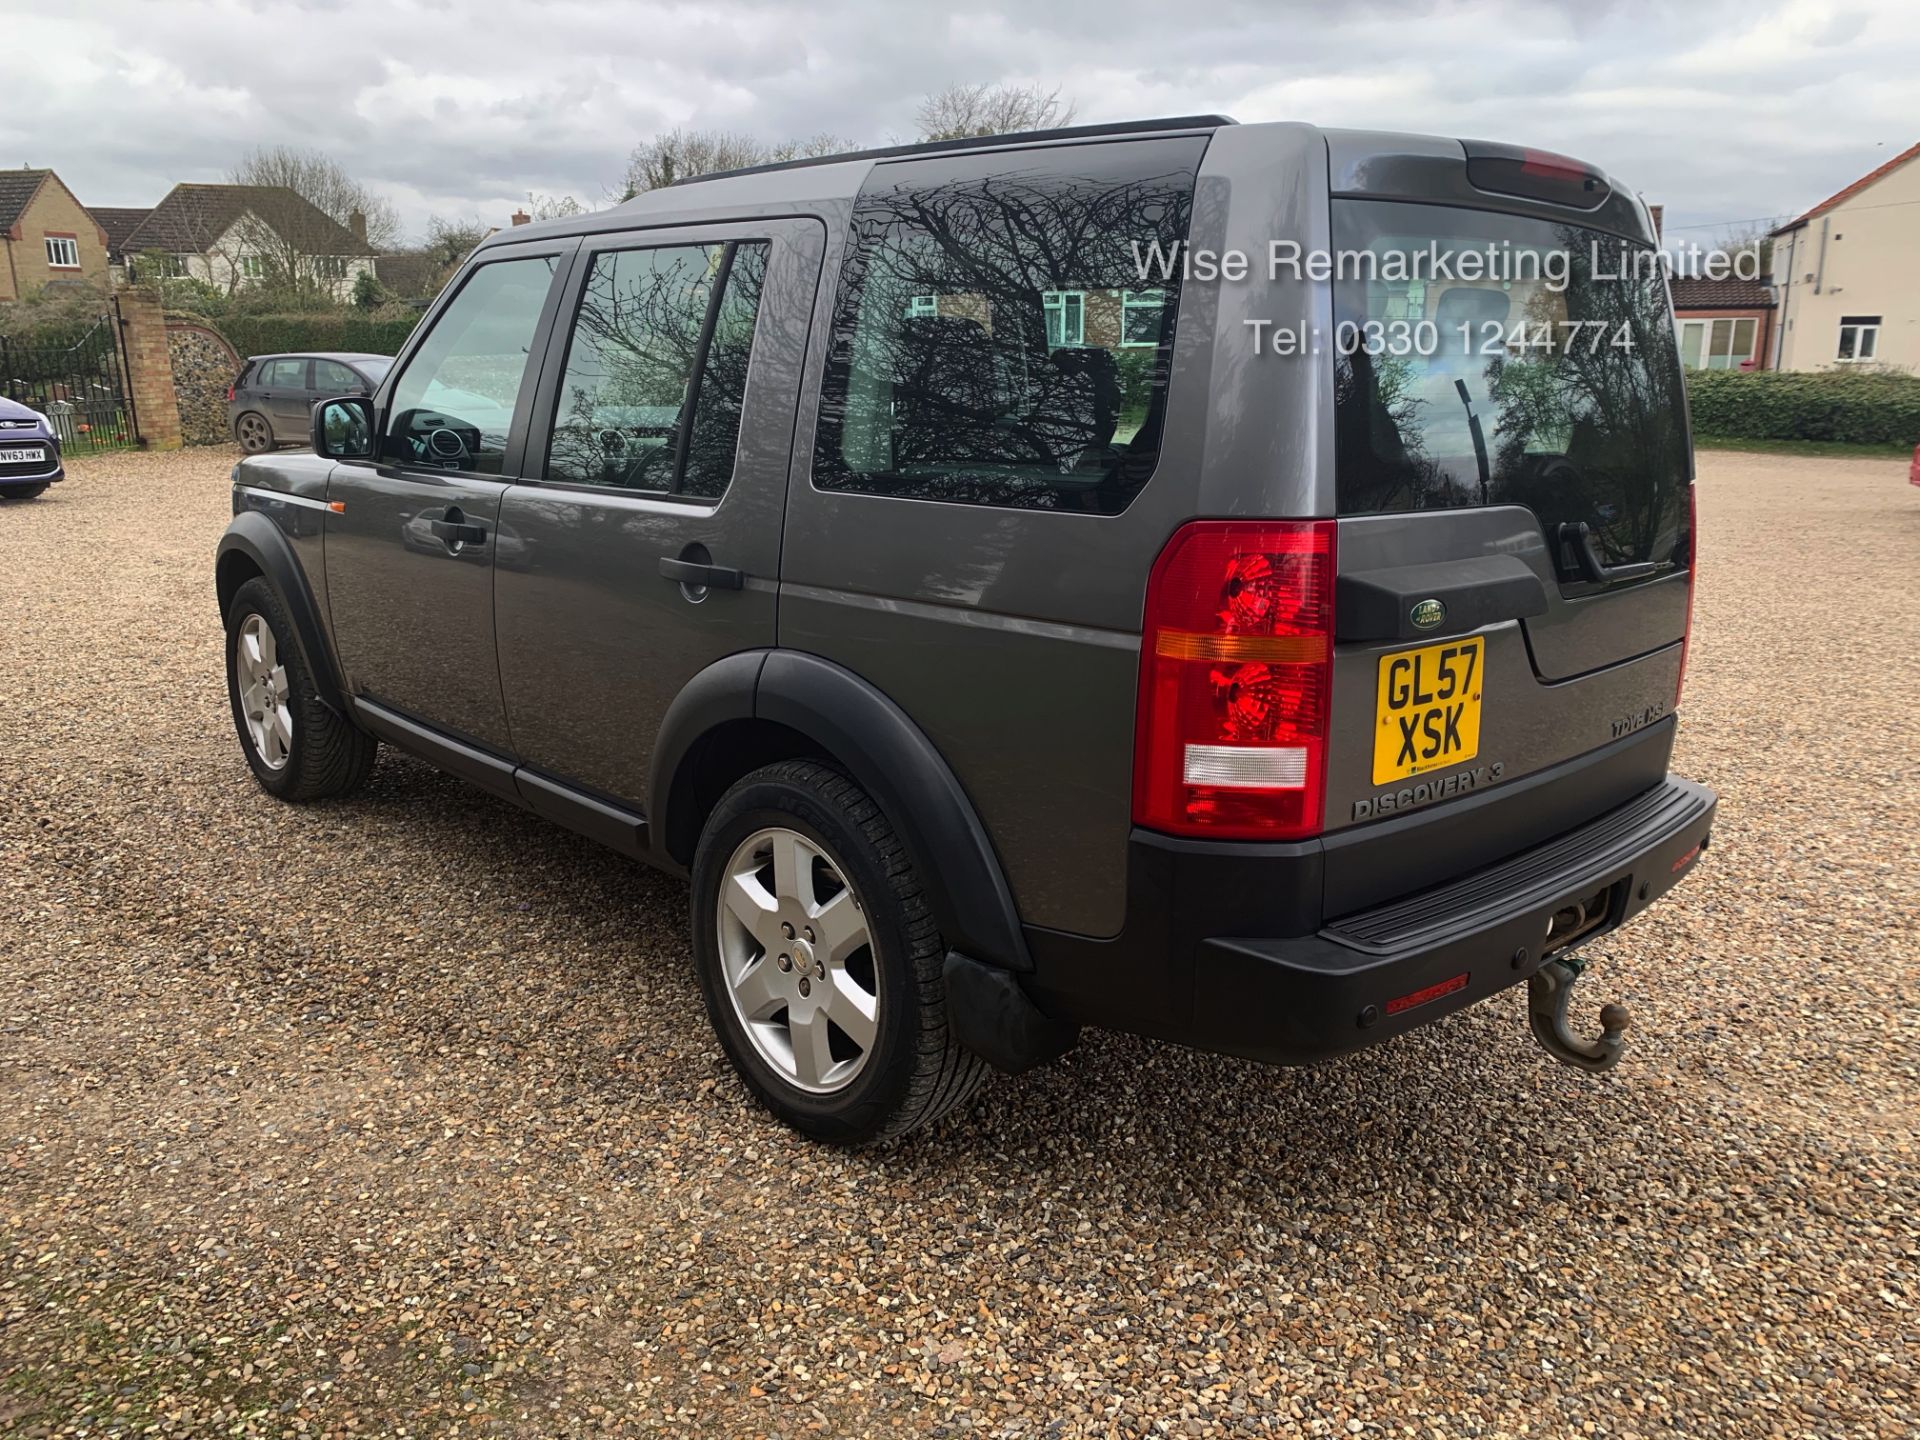 Land Rover Discovery 2.7 TDV6 HSE - Automatic - 2008 Reg - Full Leather - 7 Seater - Sat Nav - - Image 5 of 31